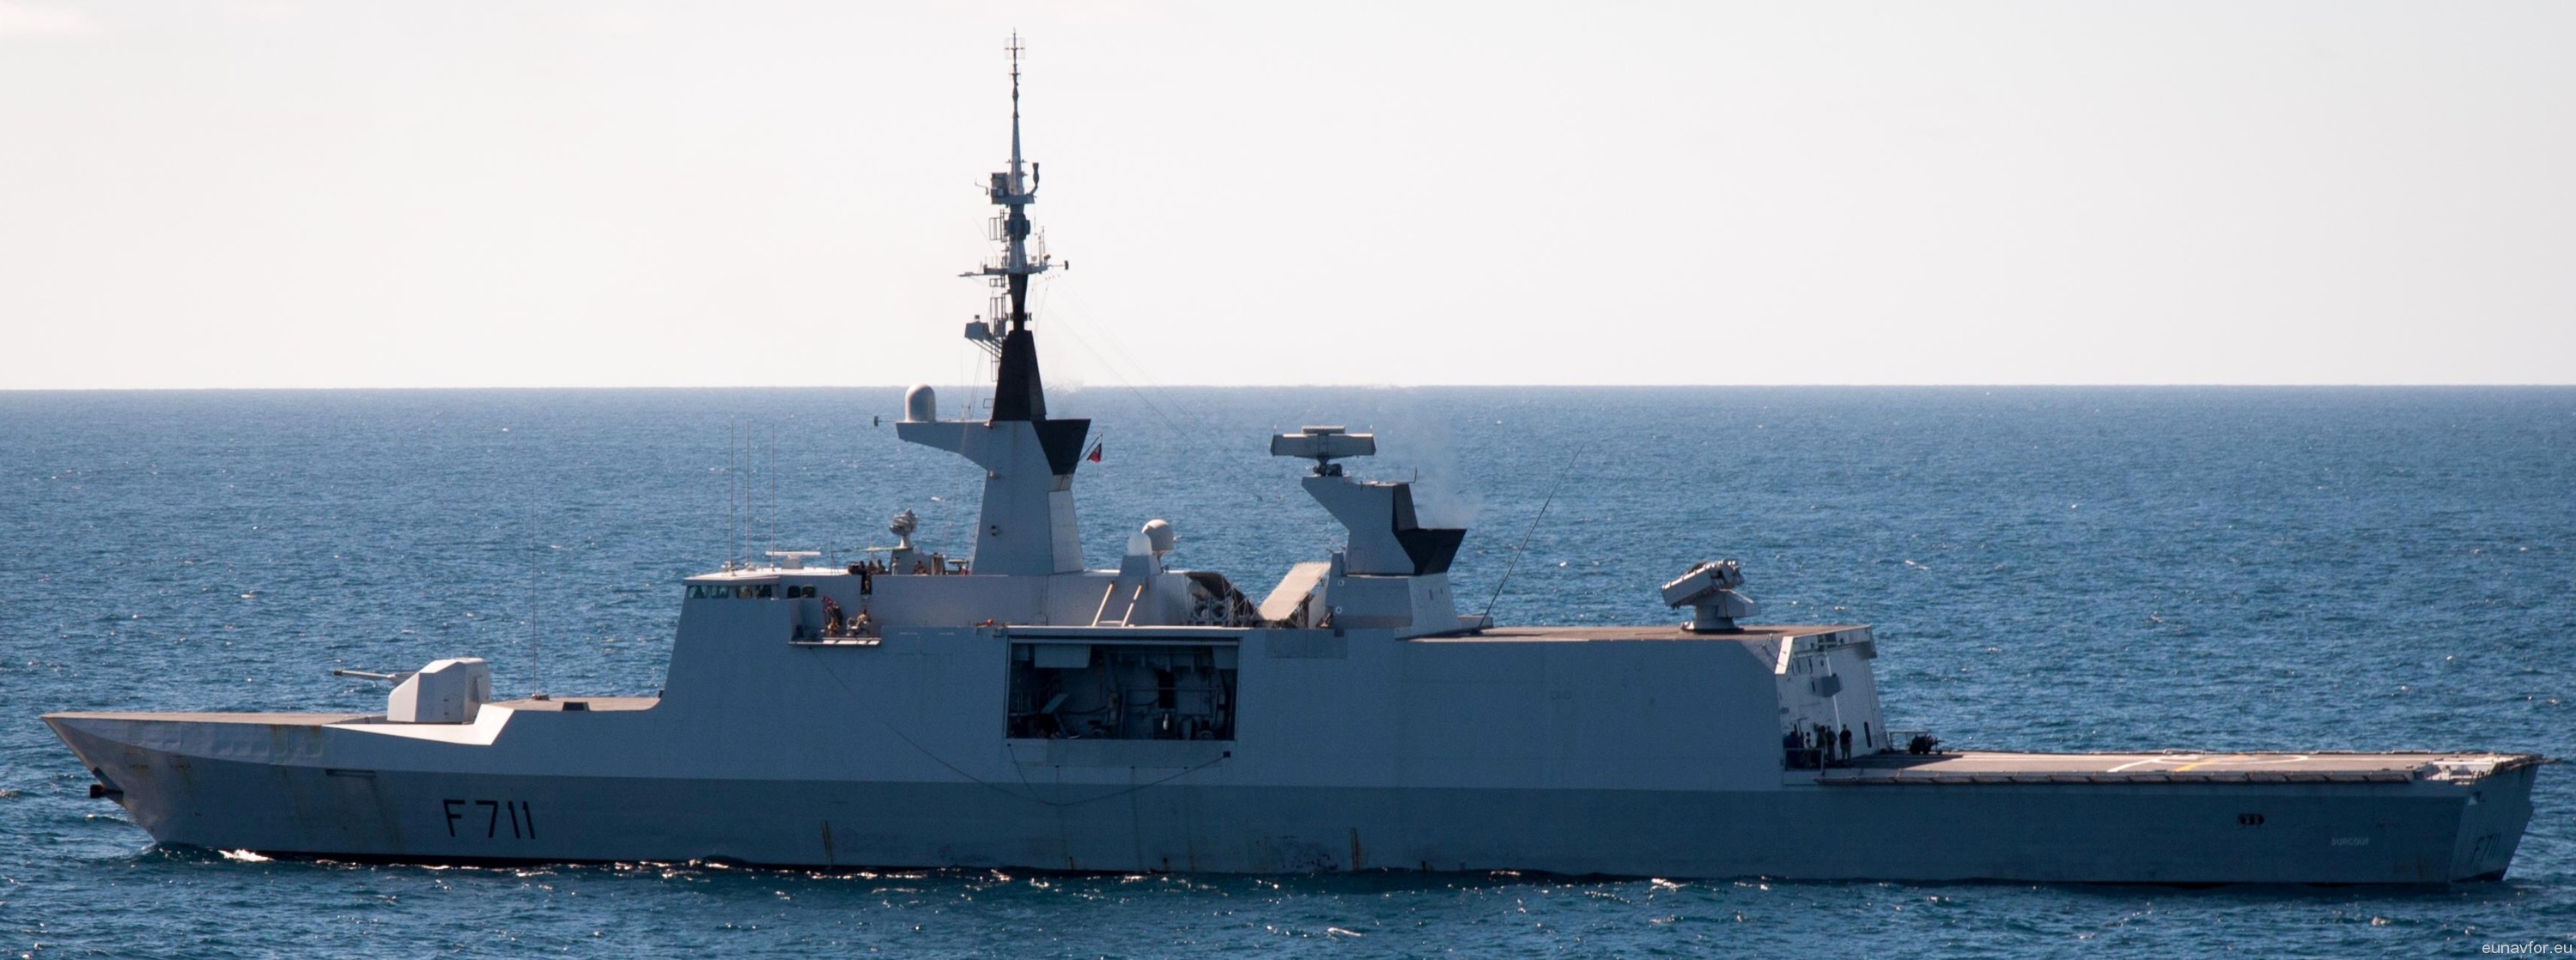 la fayette class frigate french navy marine nationale f-711 surcouf 09y